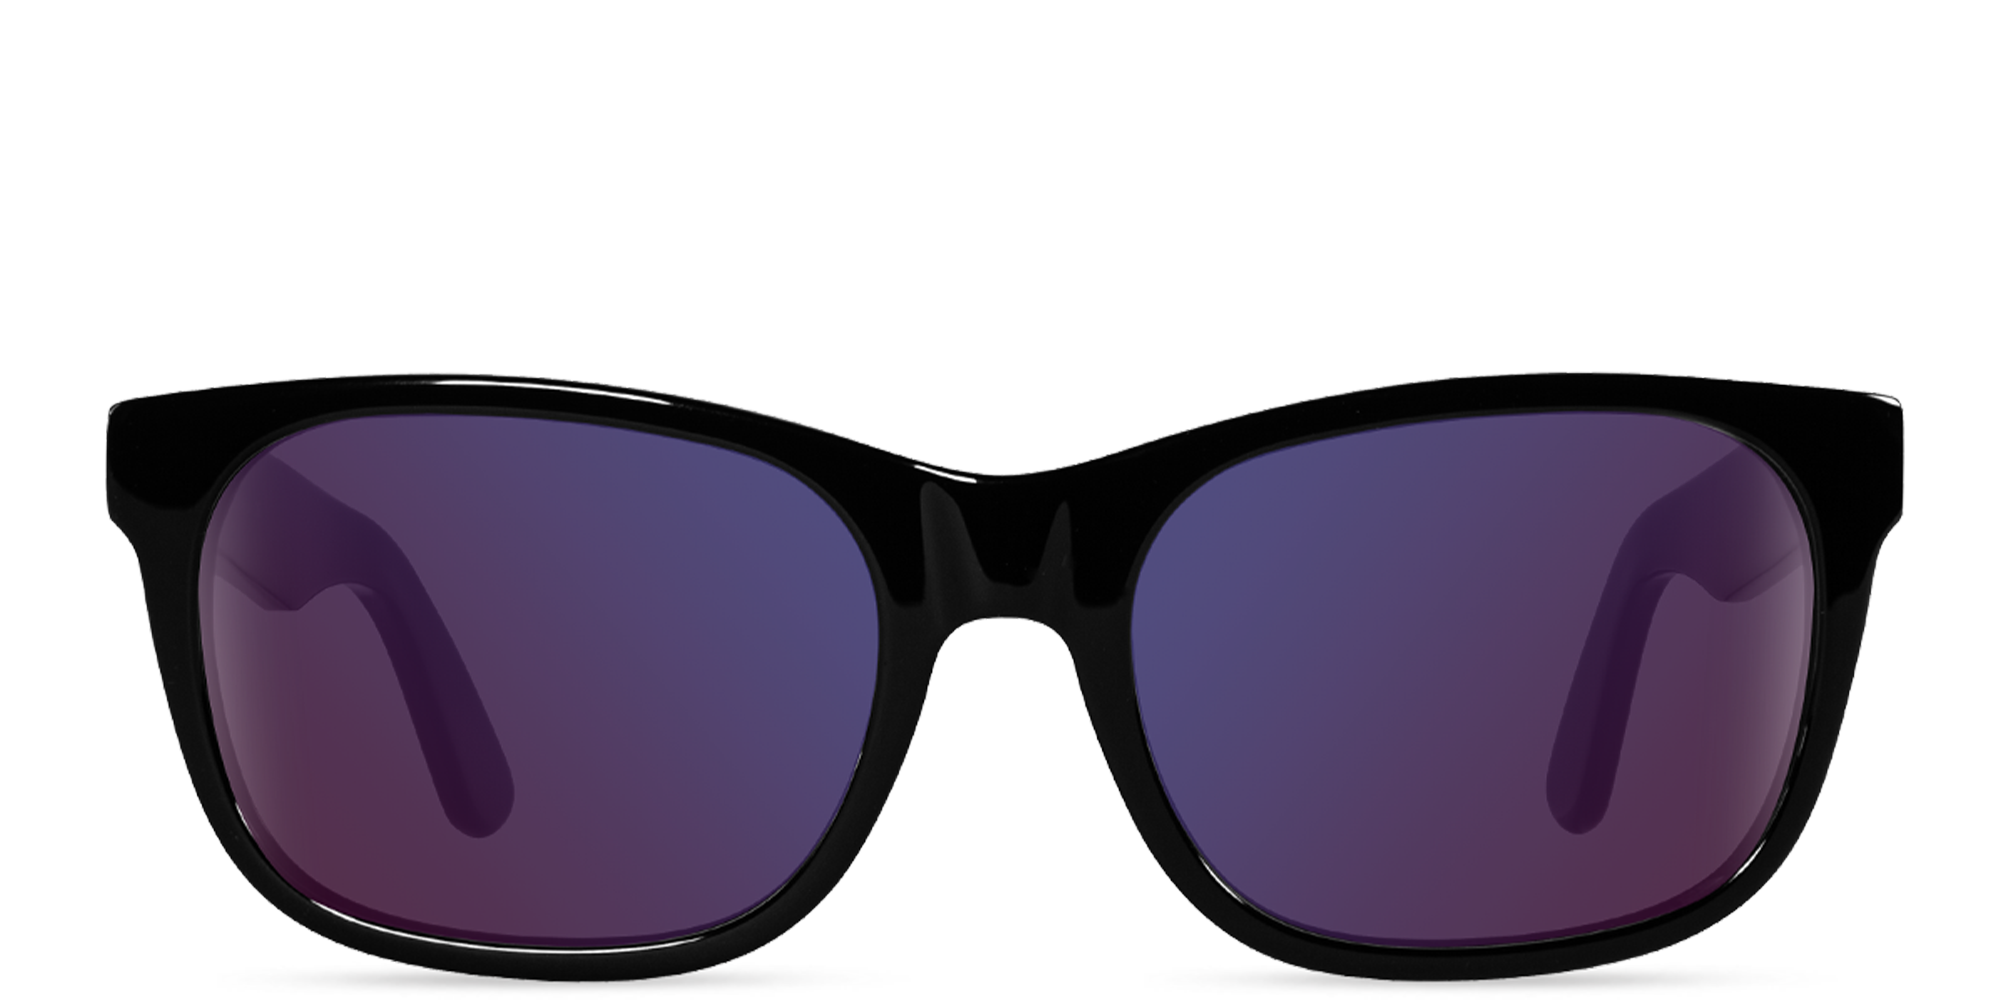 Goofy-Looking Sunglasses Offer Ultimate Protection, Great Optics